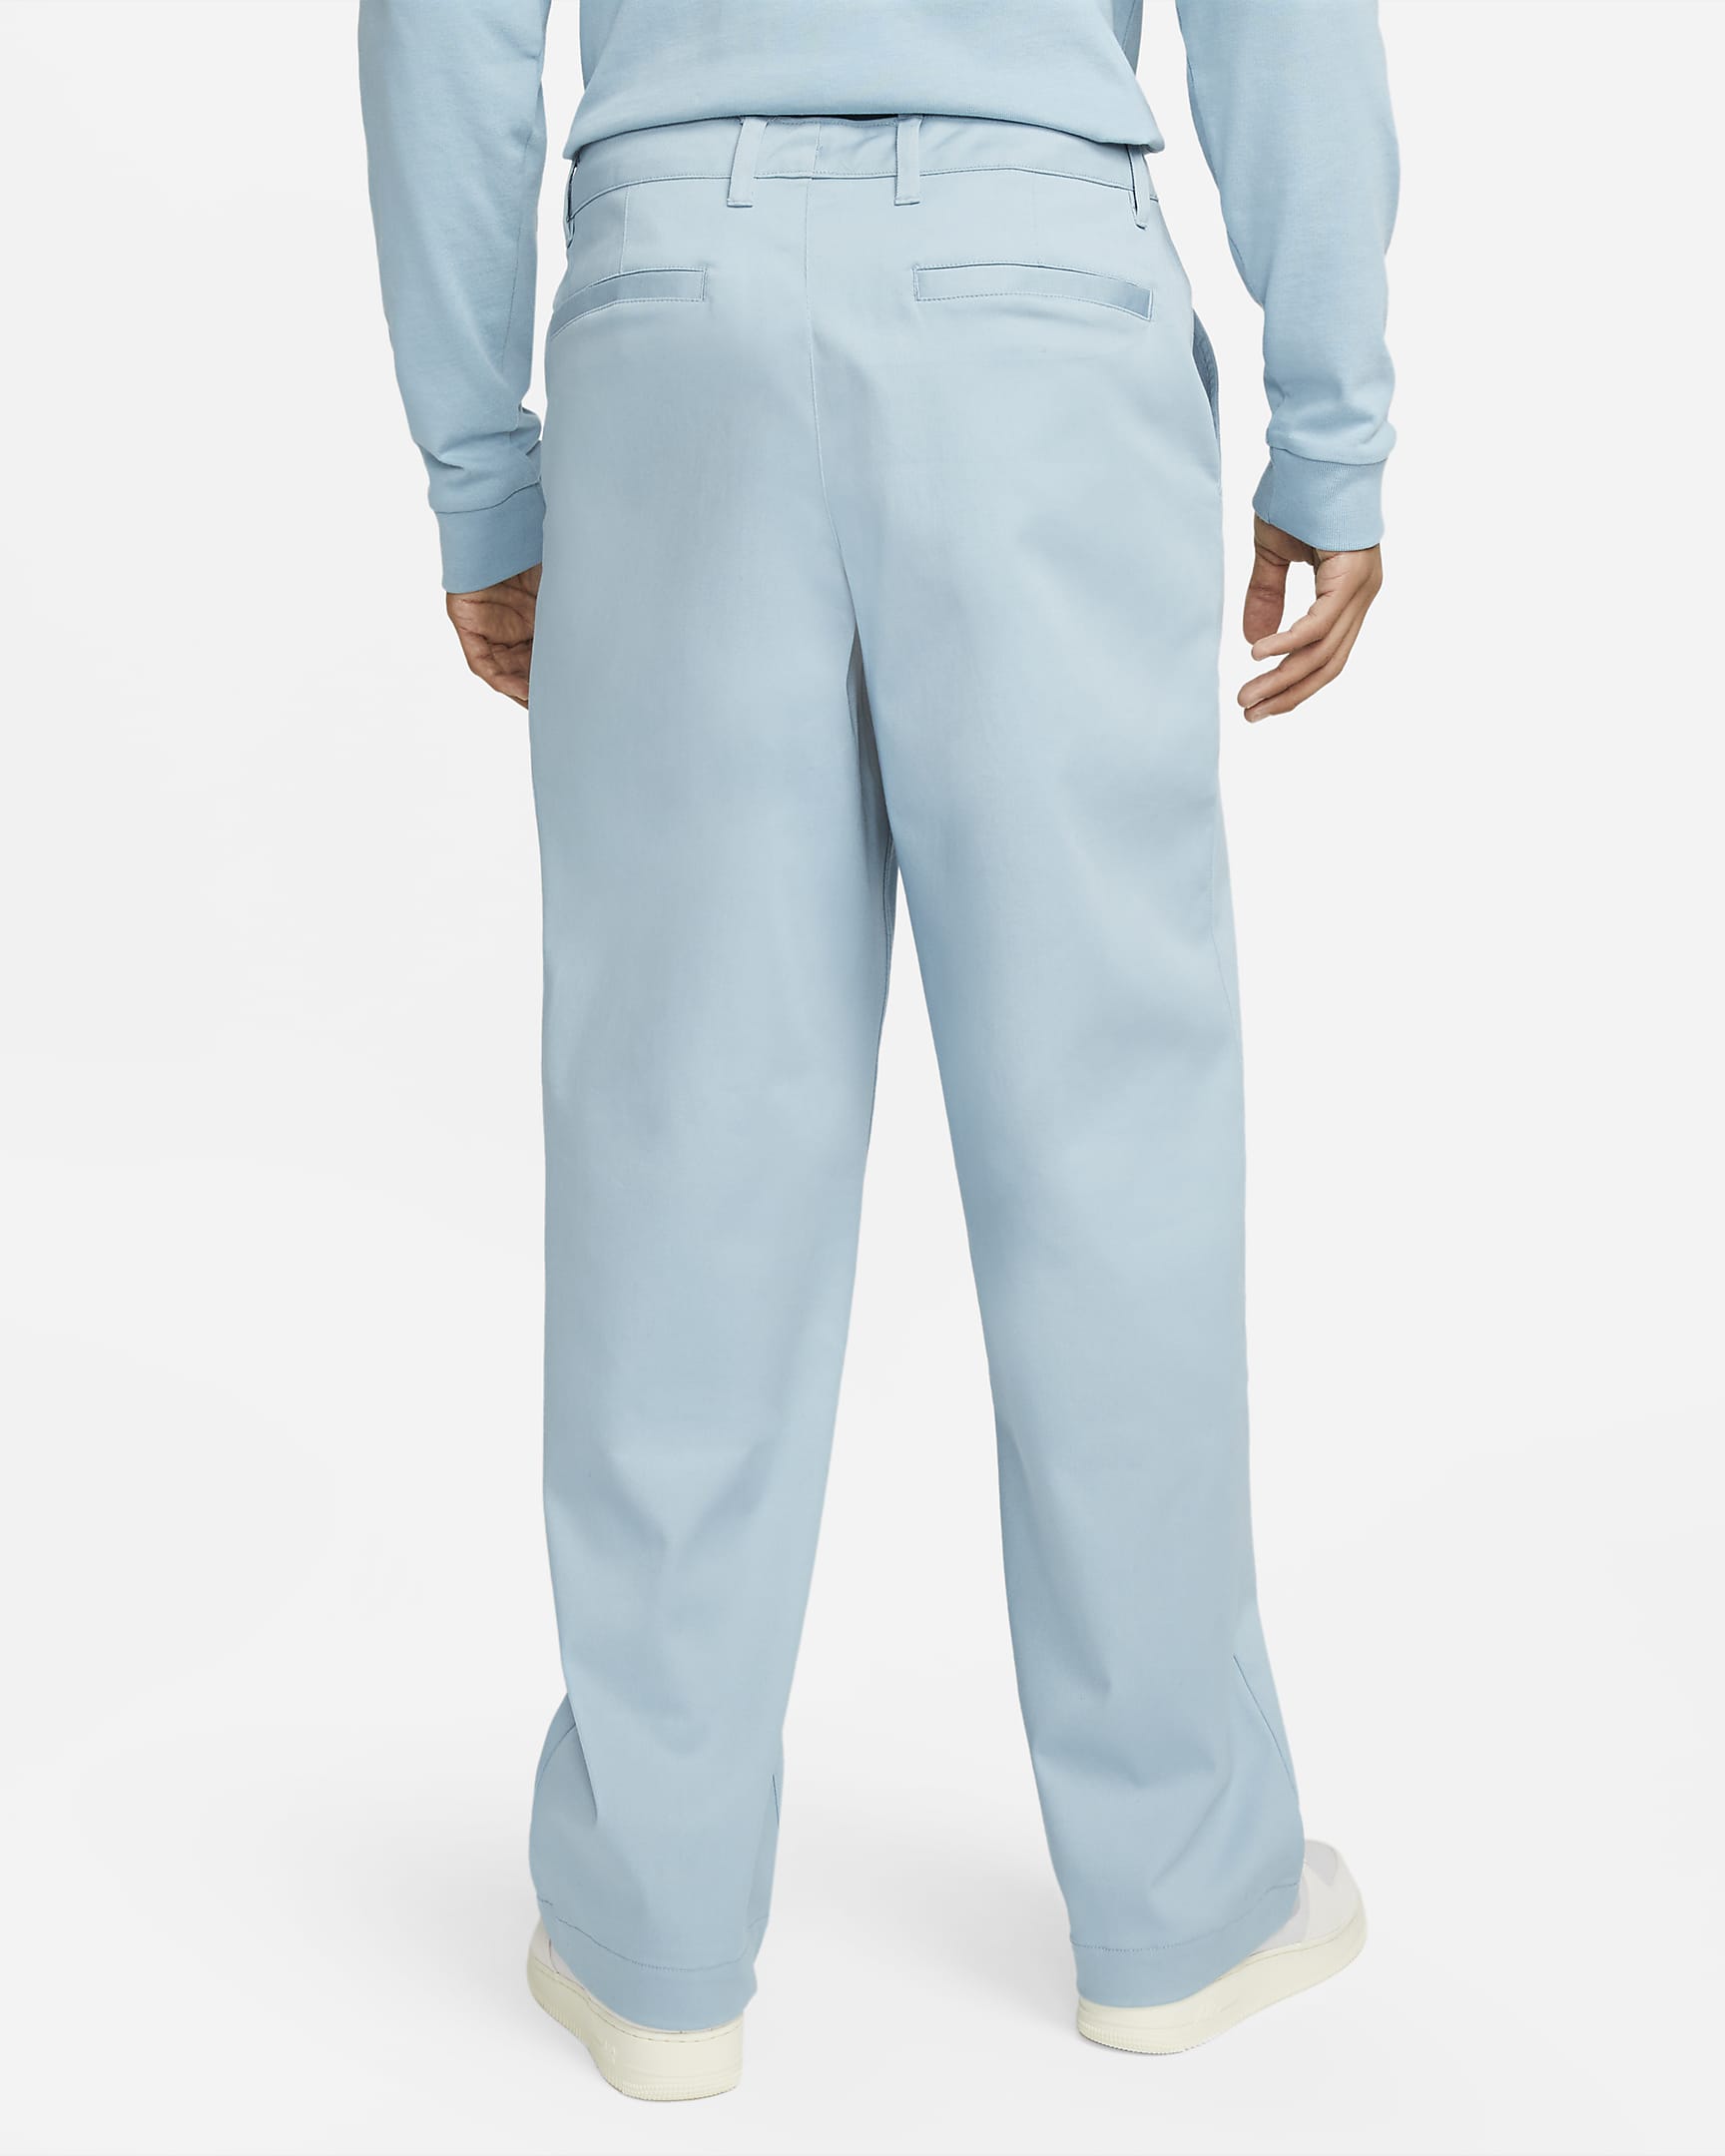 Nike Life Men's Unlined Cotton Chino Trousers. Nike HR